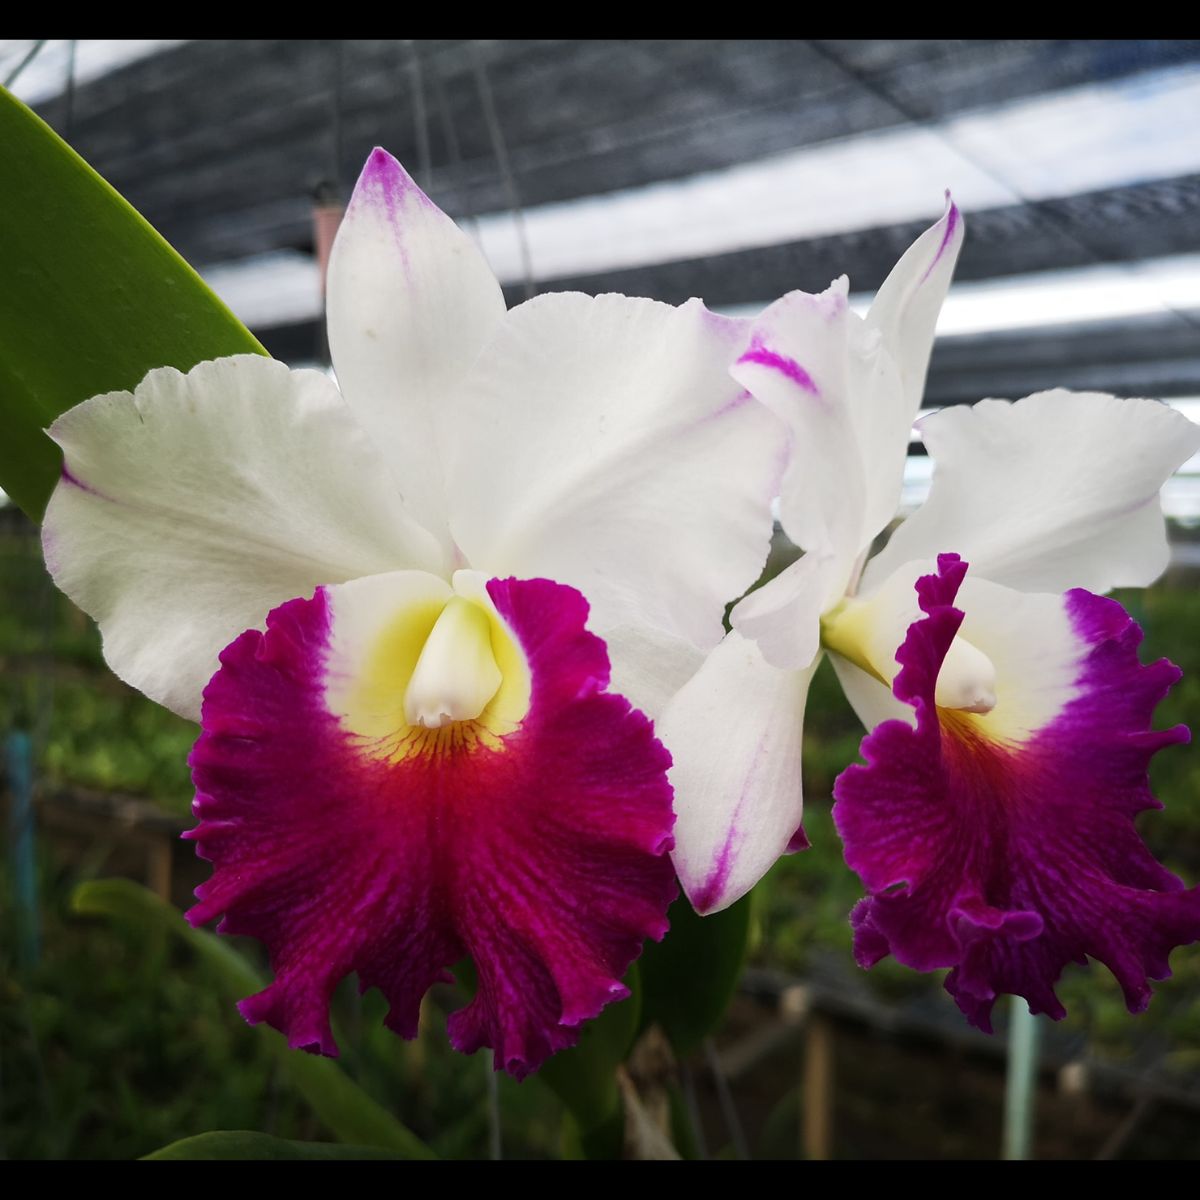 The Cattleya Rlc. Krichaya Delight orchid features large, showy blooms that are truly captivating. The flowers exhibit a stunning combination of colors, including shades of pink, purple, and white. The petals often display intricate patterns and markings, adding to the beauty of this orchid variety.